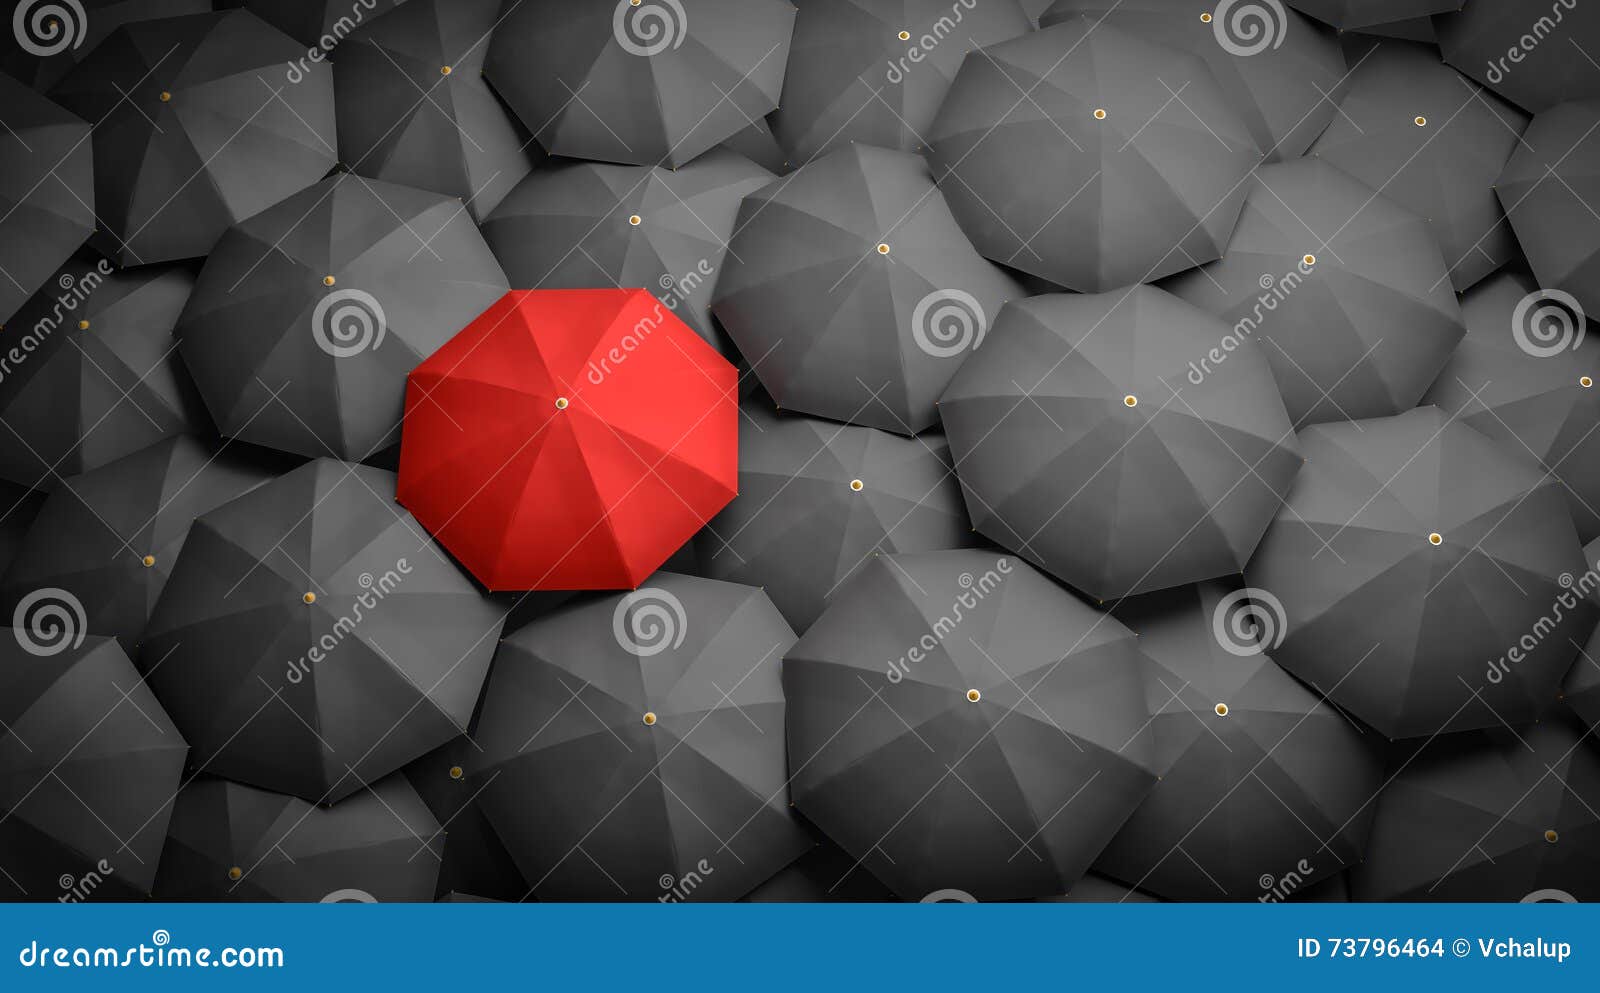 leadership or distinction concept. red umbrella and many black umbrellas around. 3d rendered 